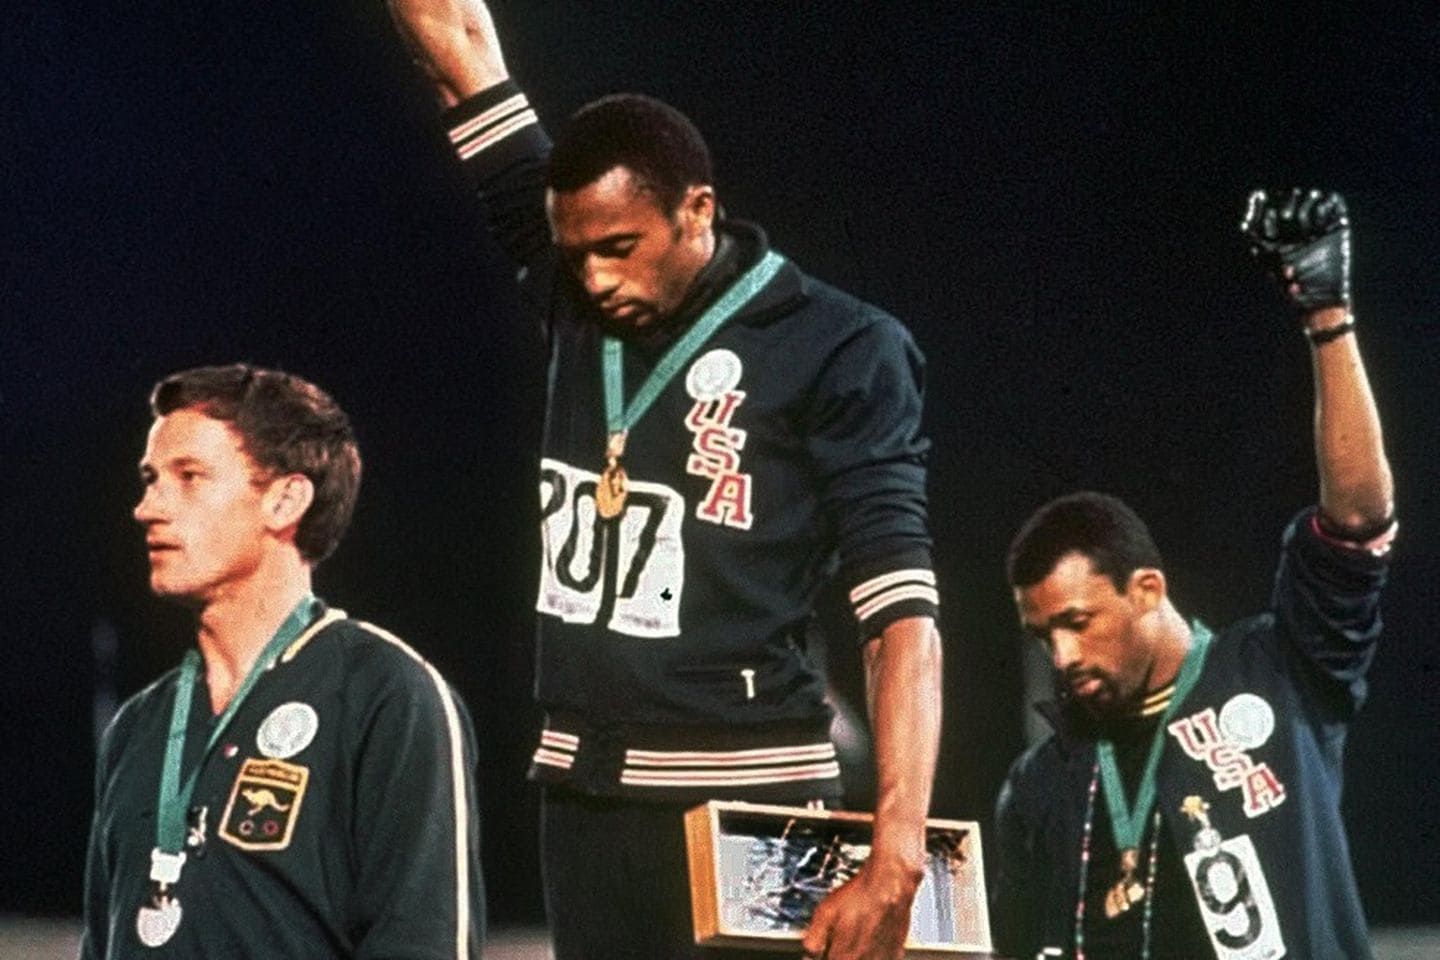 U.S. Olympic gold medallist Tommie Smith, center, and his teammate John Carlos, who won bronze in the 200-meter race, raise their fists during the U.S. national anthem at the 1968 Summer Games in Mexico City. Australian silver medalist Peter Norman is at left. (AP Photo)